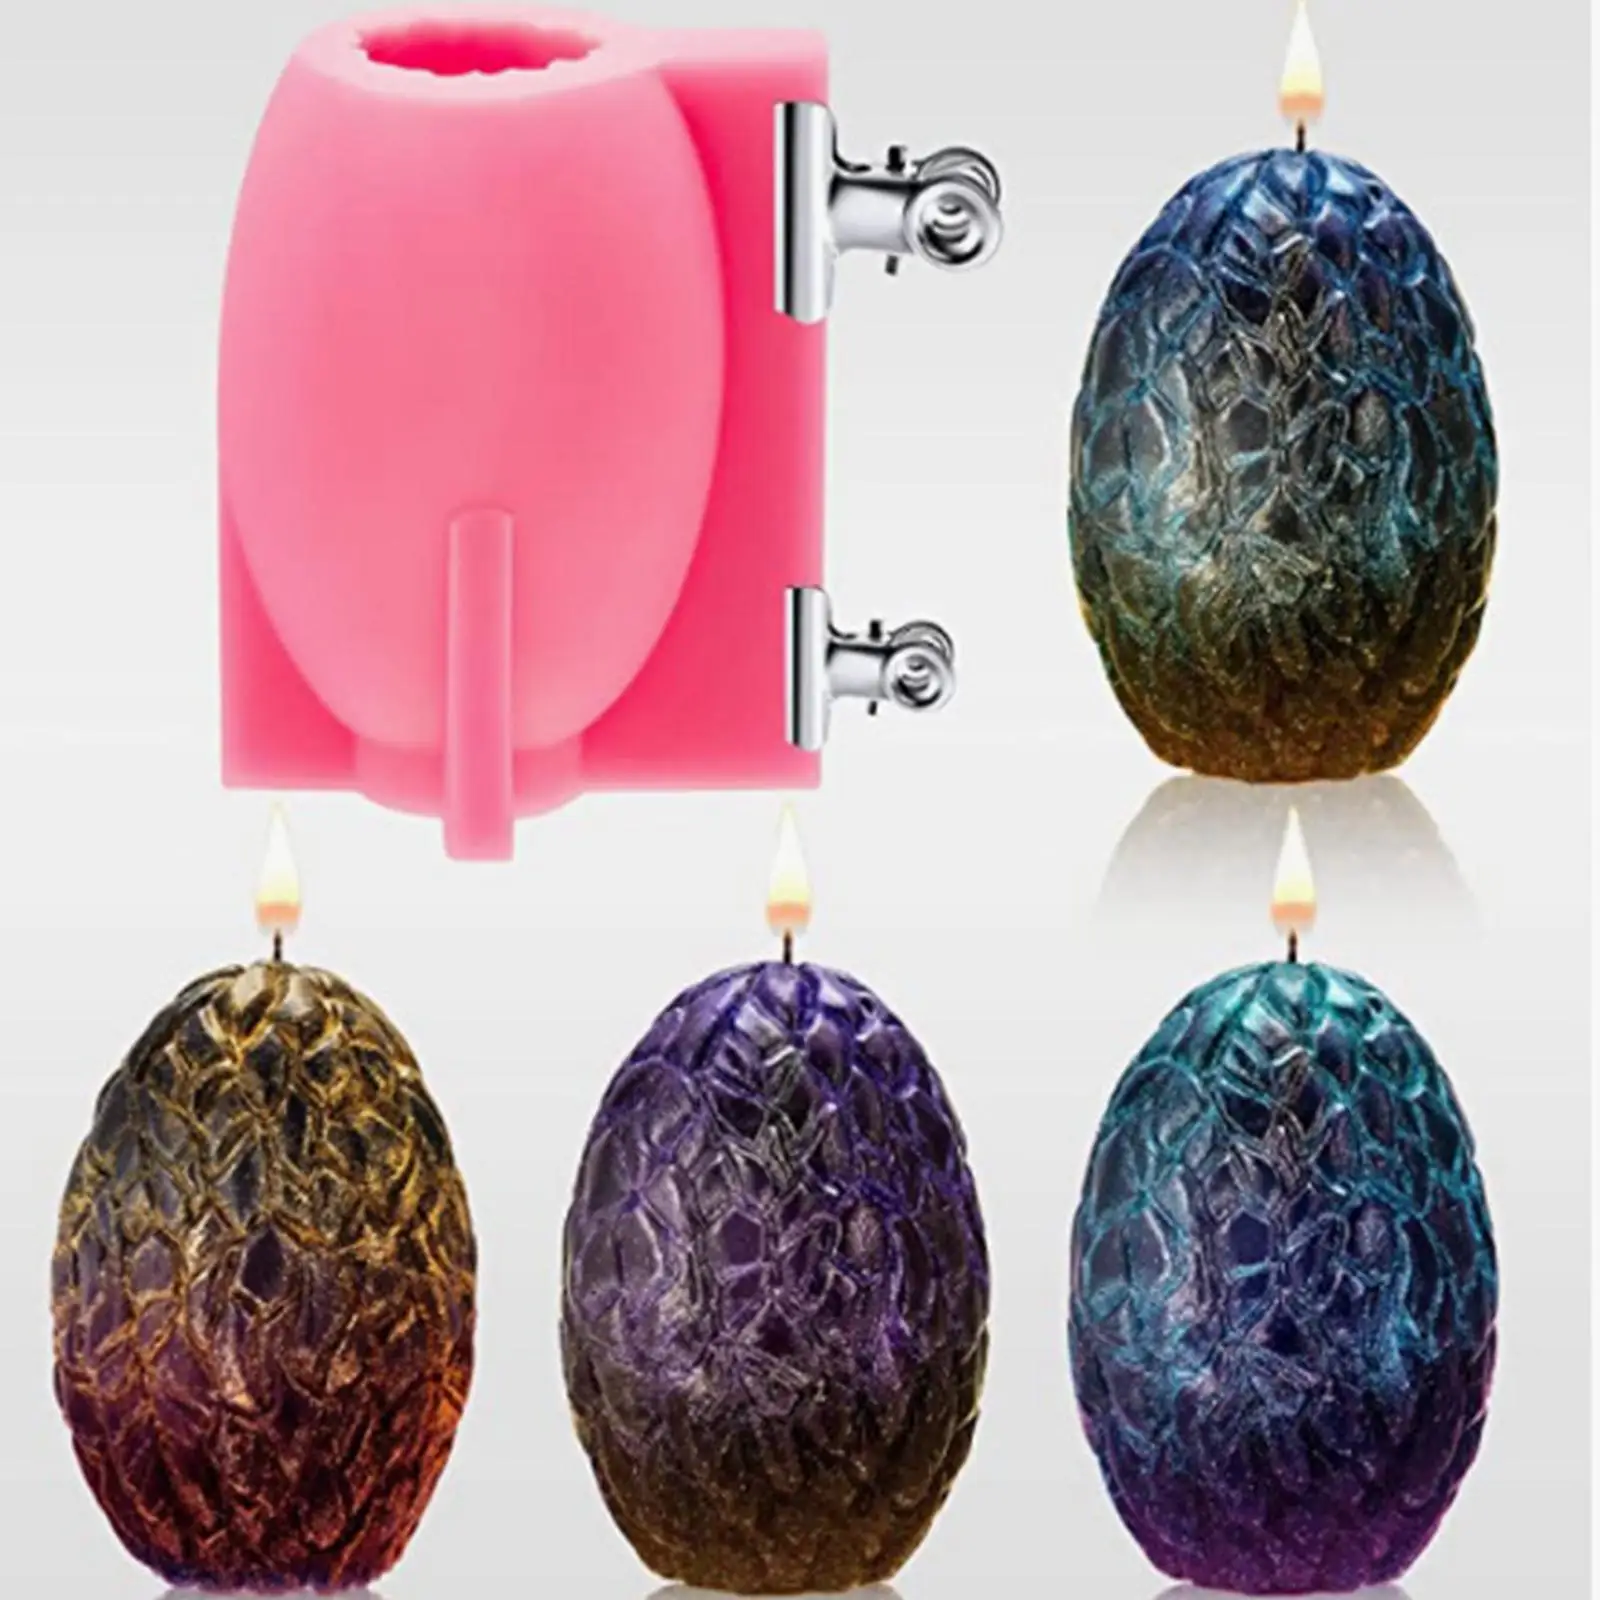 3D Dragon Egg Silicone  for Candle Making Plaster Craft Ornaments DIY Egg Shaped Handmade Soap  Epoxy Resin Casting 